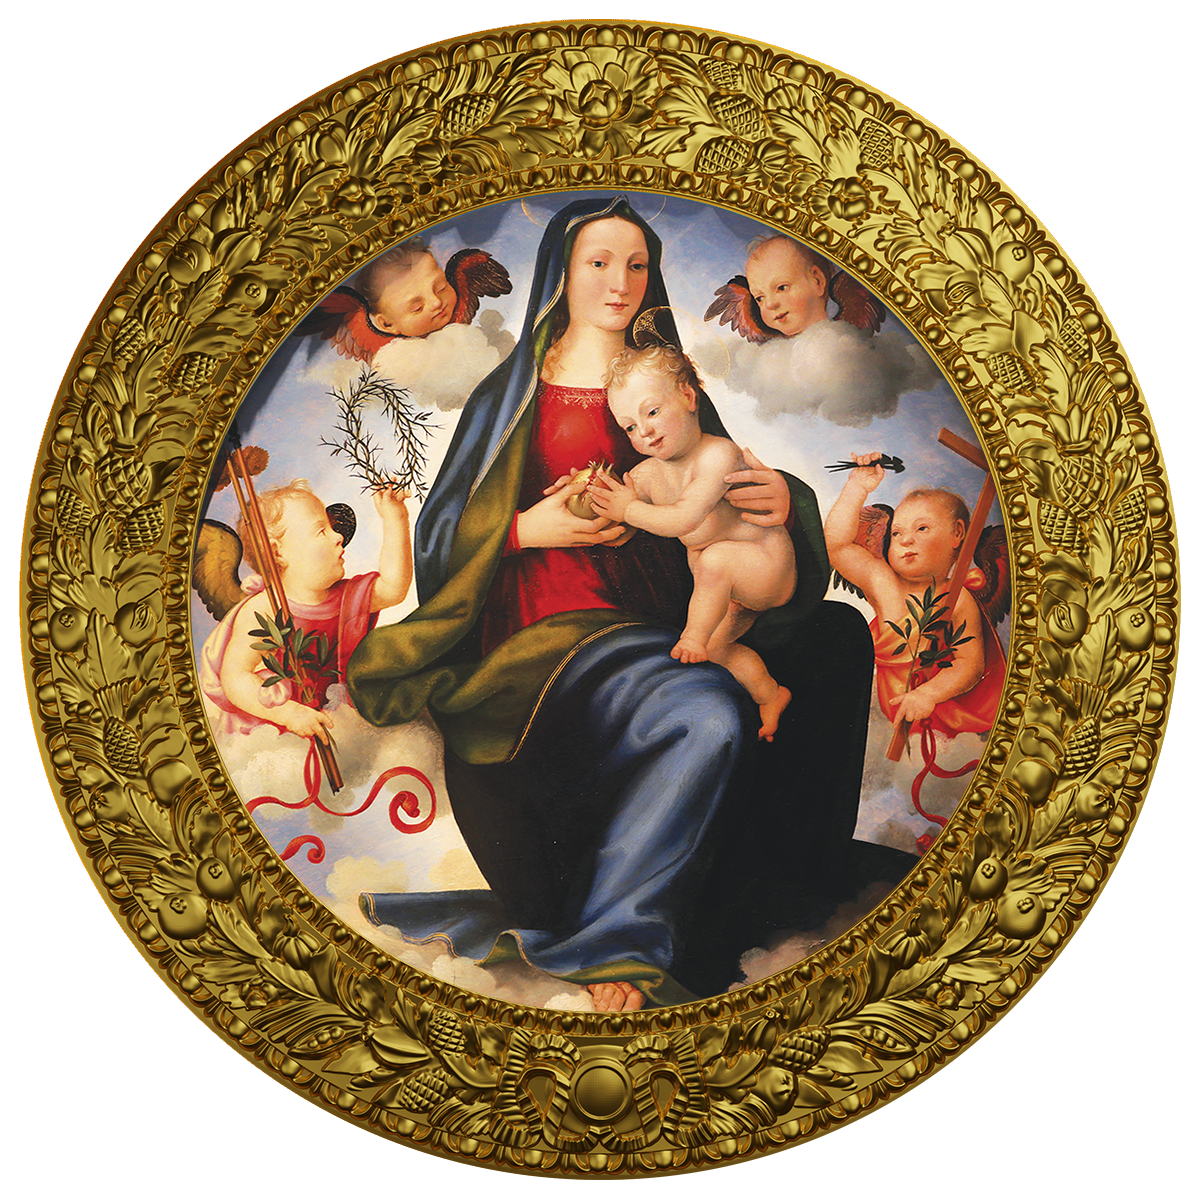 Cameroon - 2022 - 500 CFA Francs - Ave Maria Mariotto Albertinelli  – Madonna and Child Enthroned in the Clouds